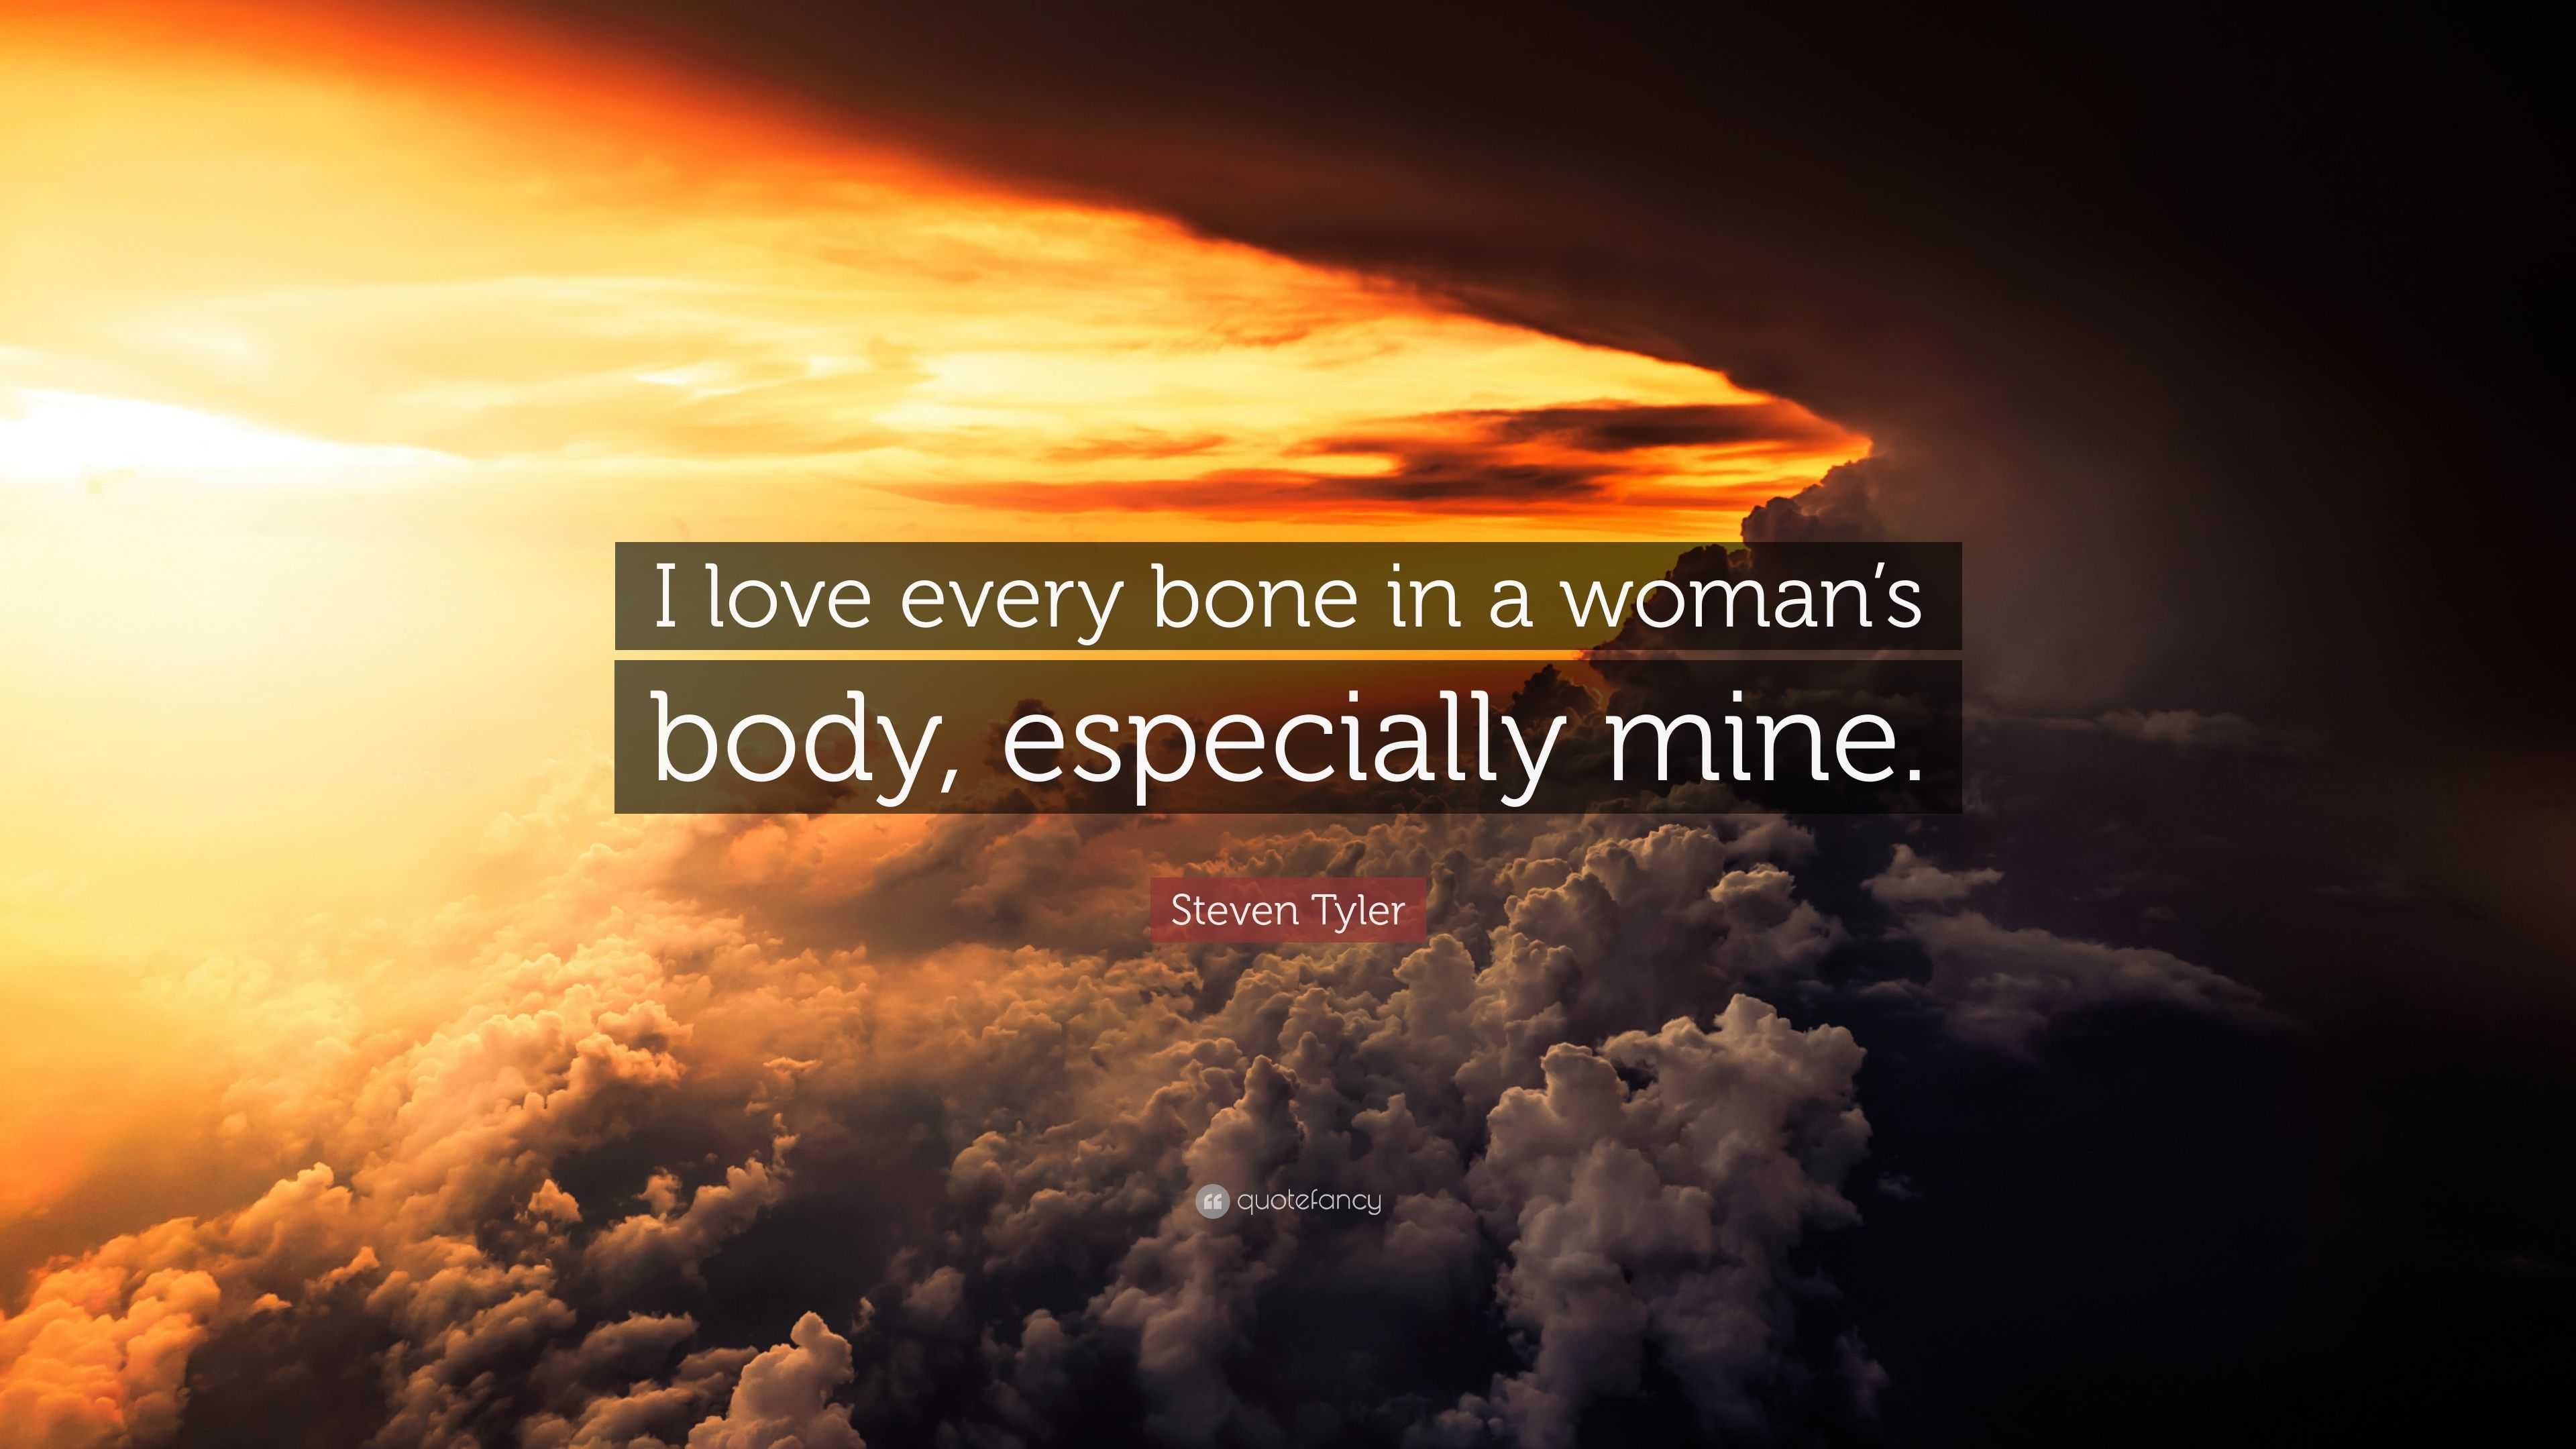 I love every bone in my body.. especially yours ;%5D